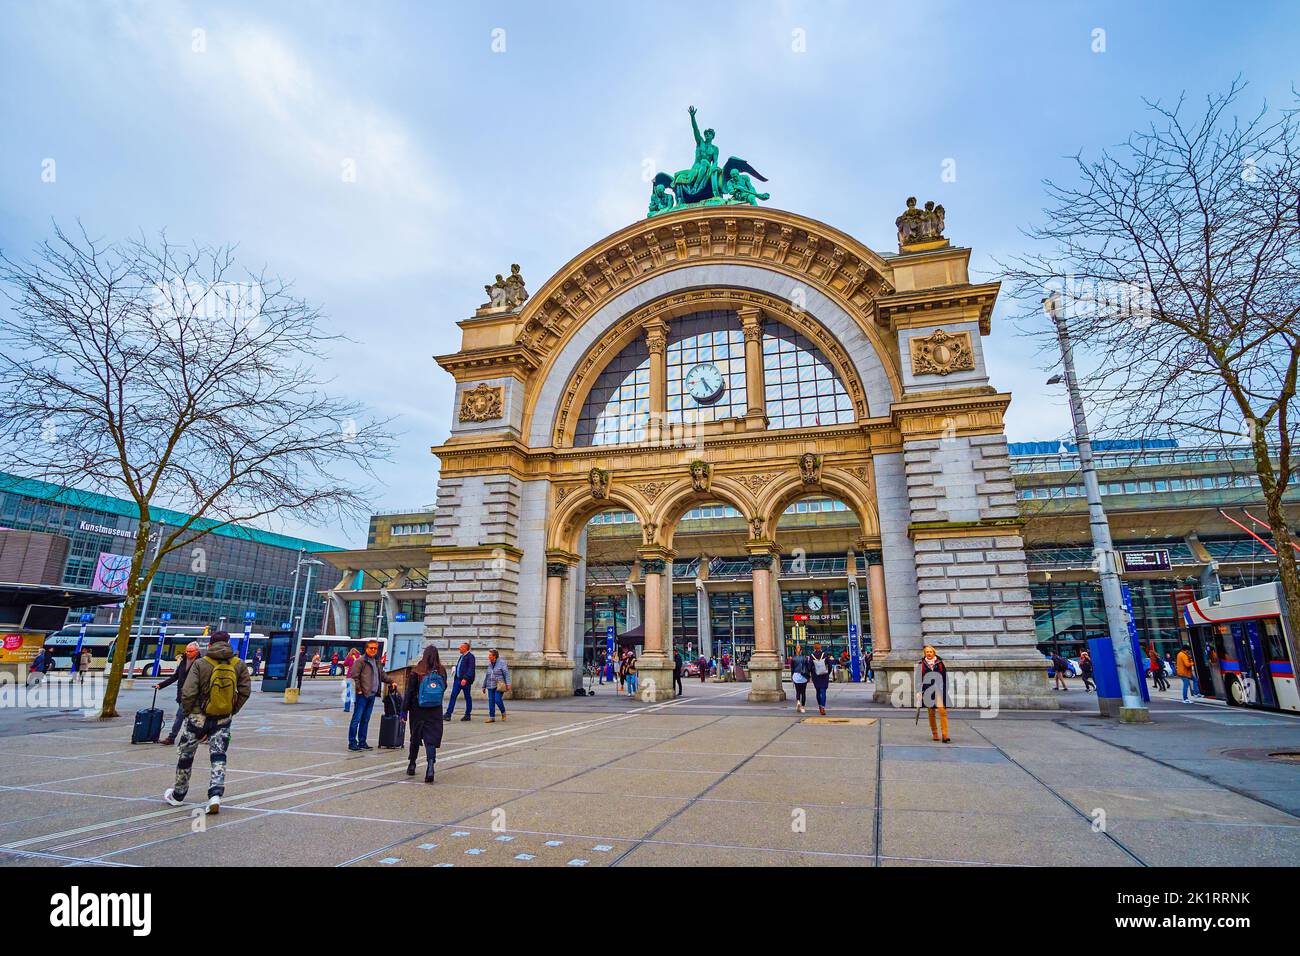 LUCERNE, SWITZERLAND - MARCH 30, 2022: The historical arch is a remain of former railway station located on Bahnhofpl square, on March 30 in Lucerne, Stock Photo